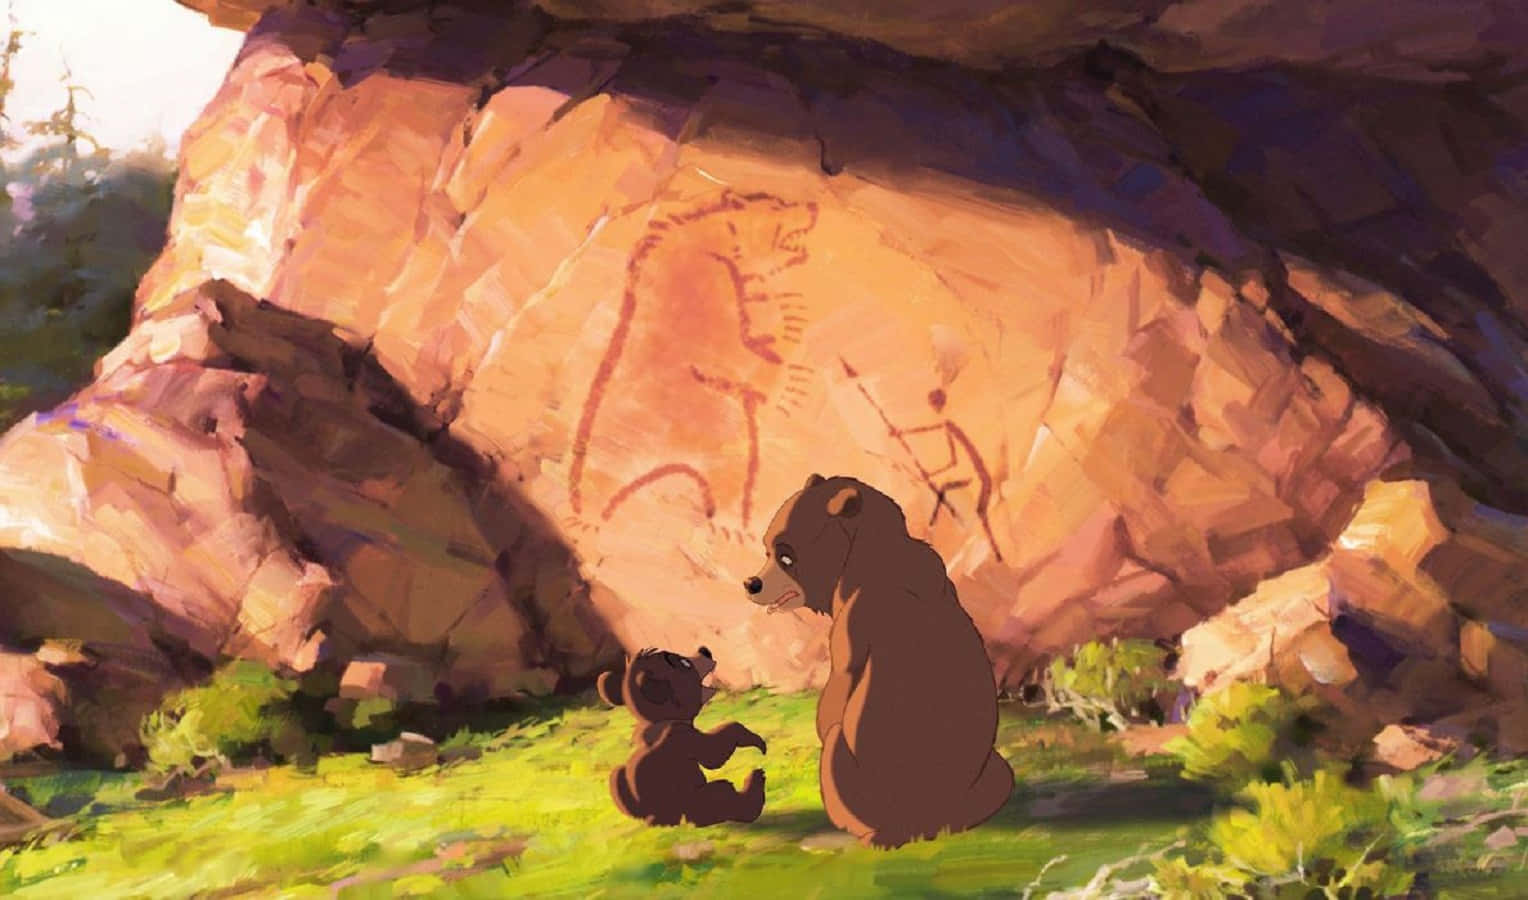 "Following the Path of Brother Bear"